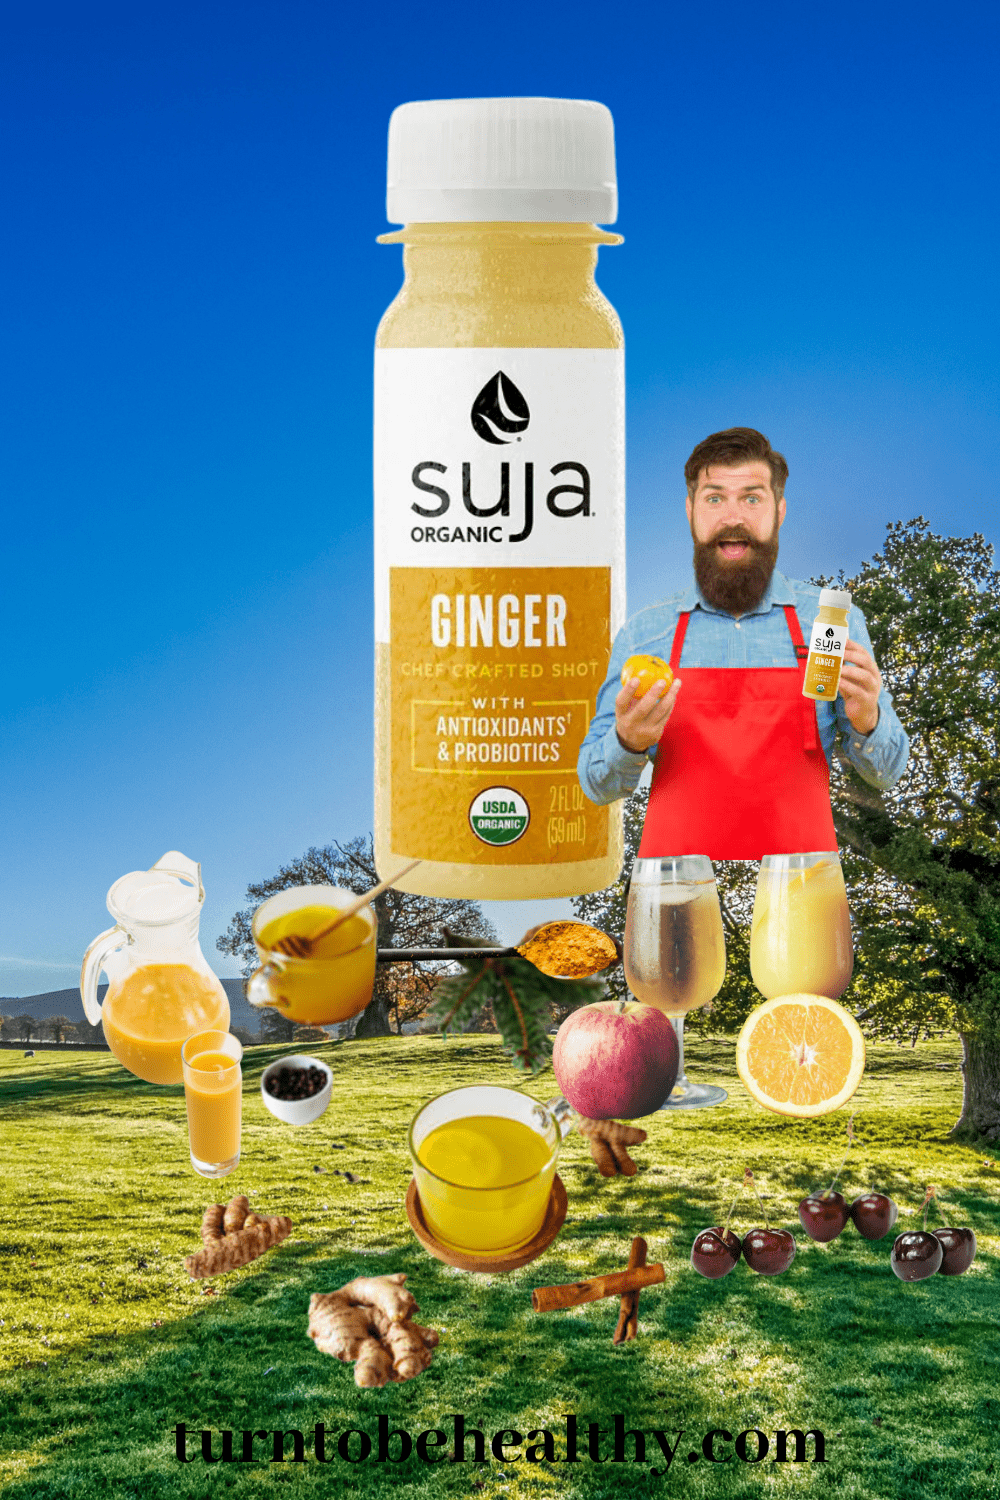 Suja Ginger Shot bottle on a table surrounded by fresh ginger, apples, and oranges, showcasing its immune-boosting and health-enhancing ingredients